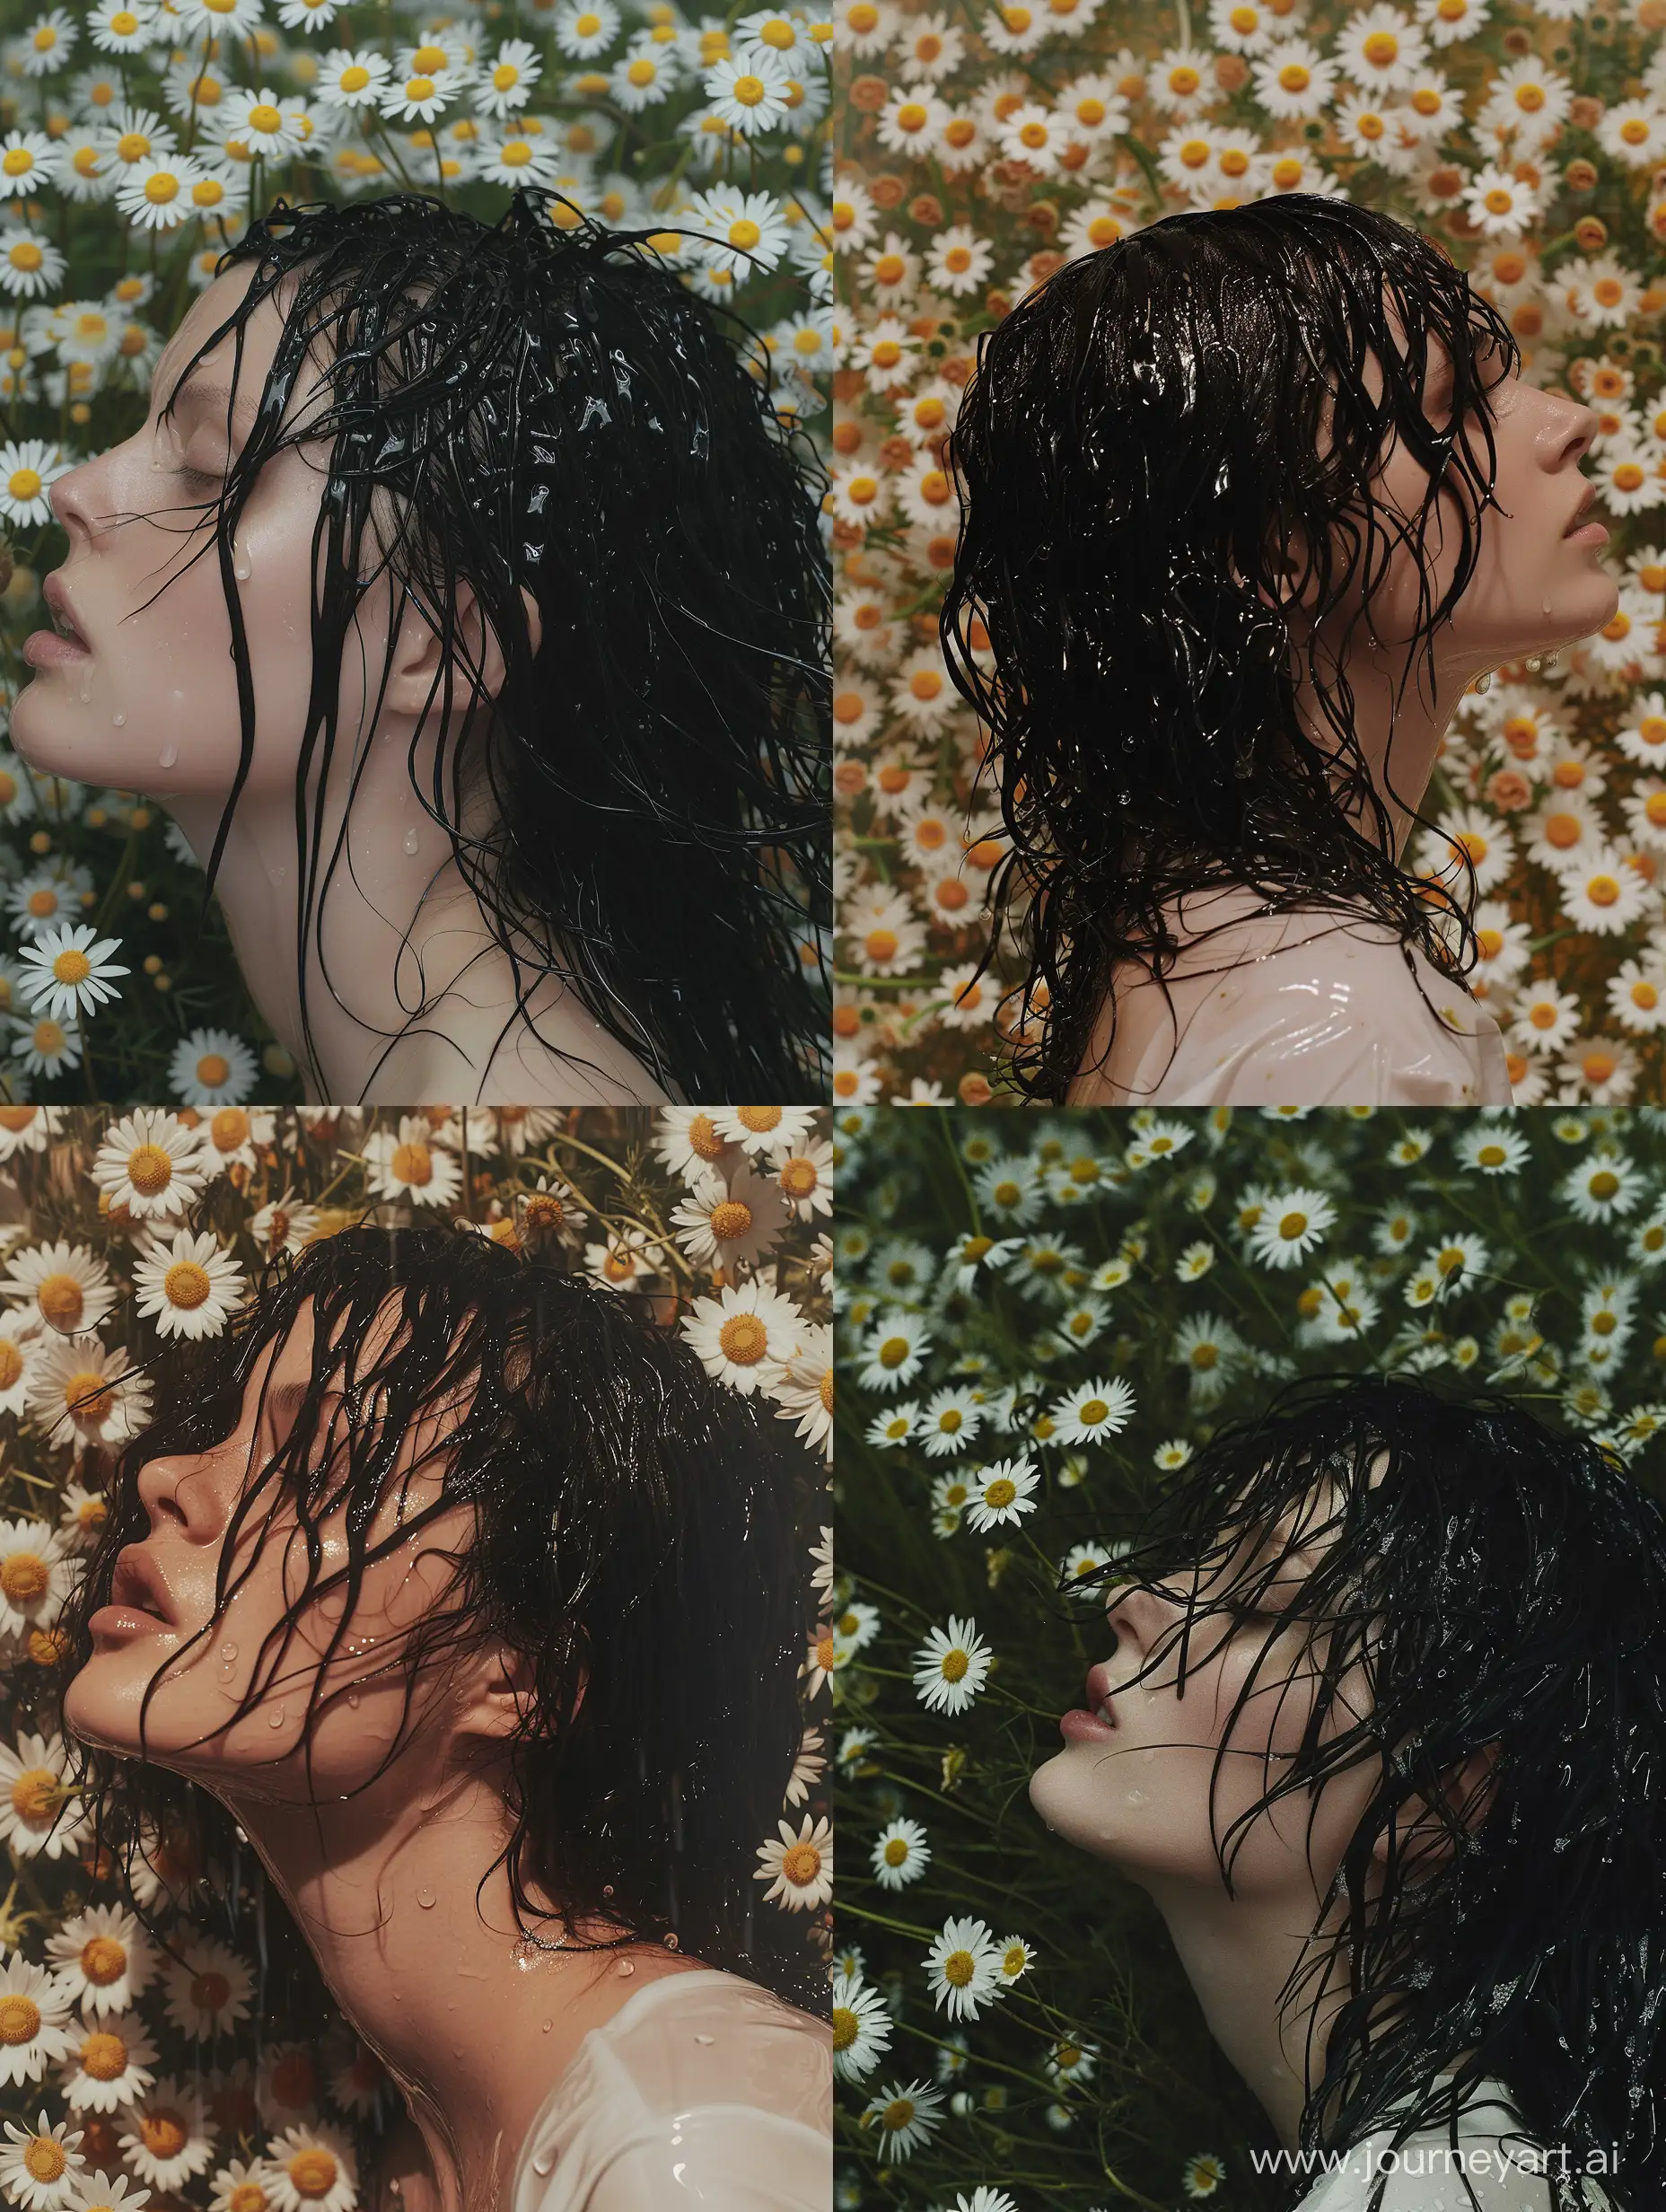 Fashion-Photography-Woman-with-Black-Wet-Hair-Amidst-Daisies-in-Moody-Atmosphere